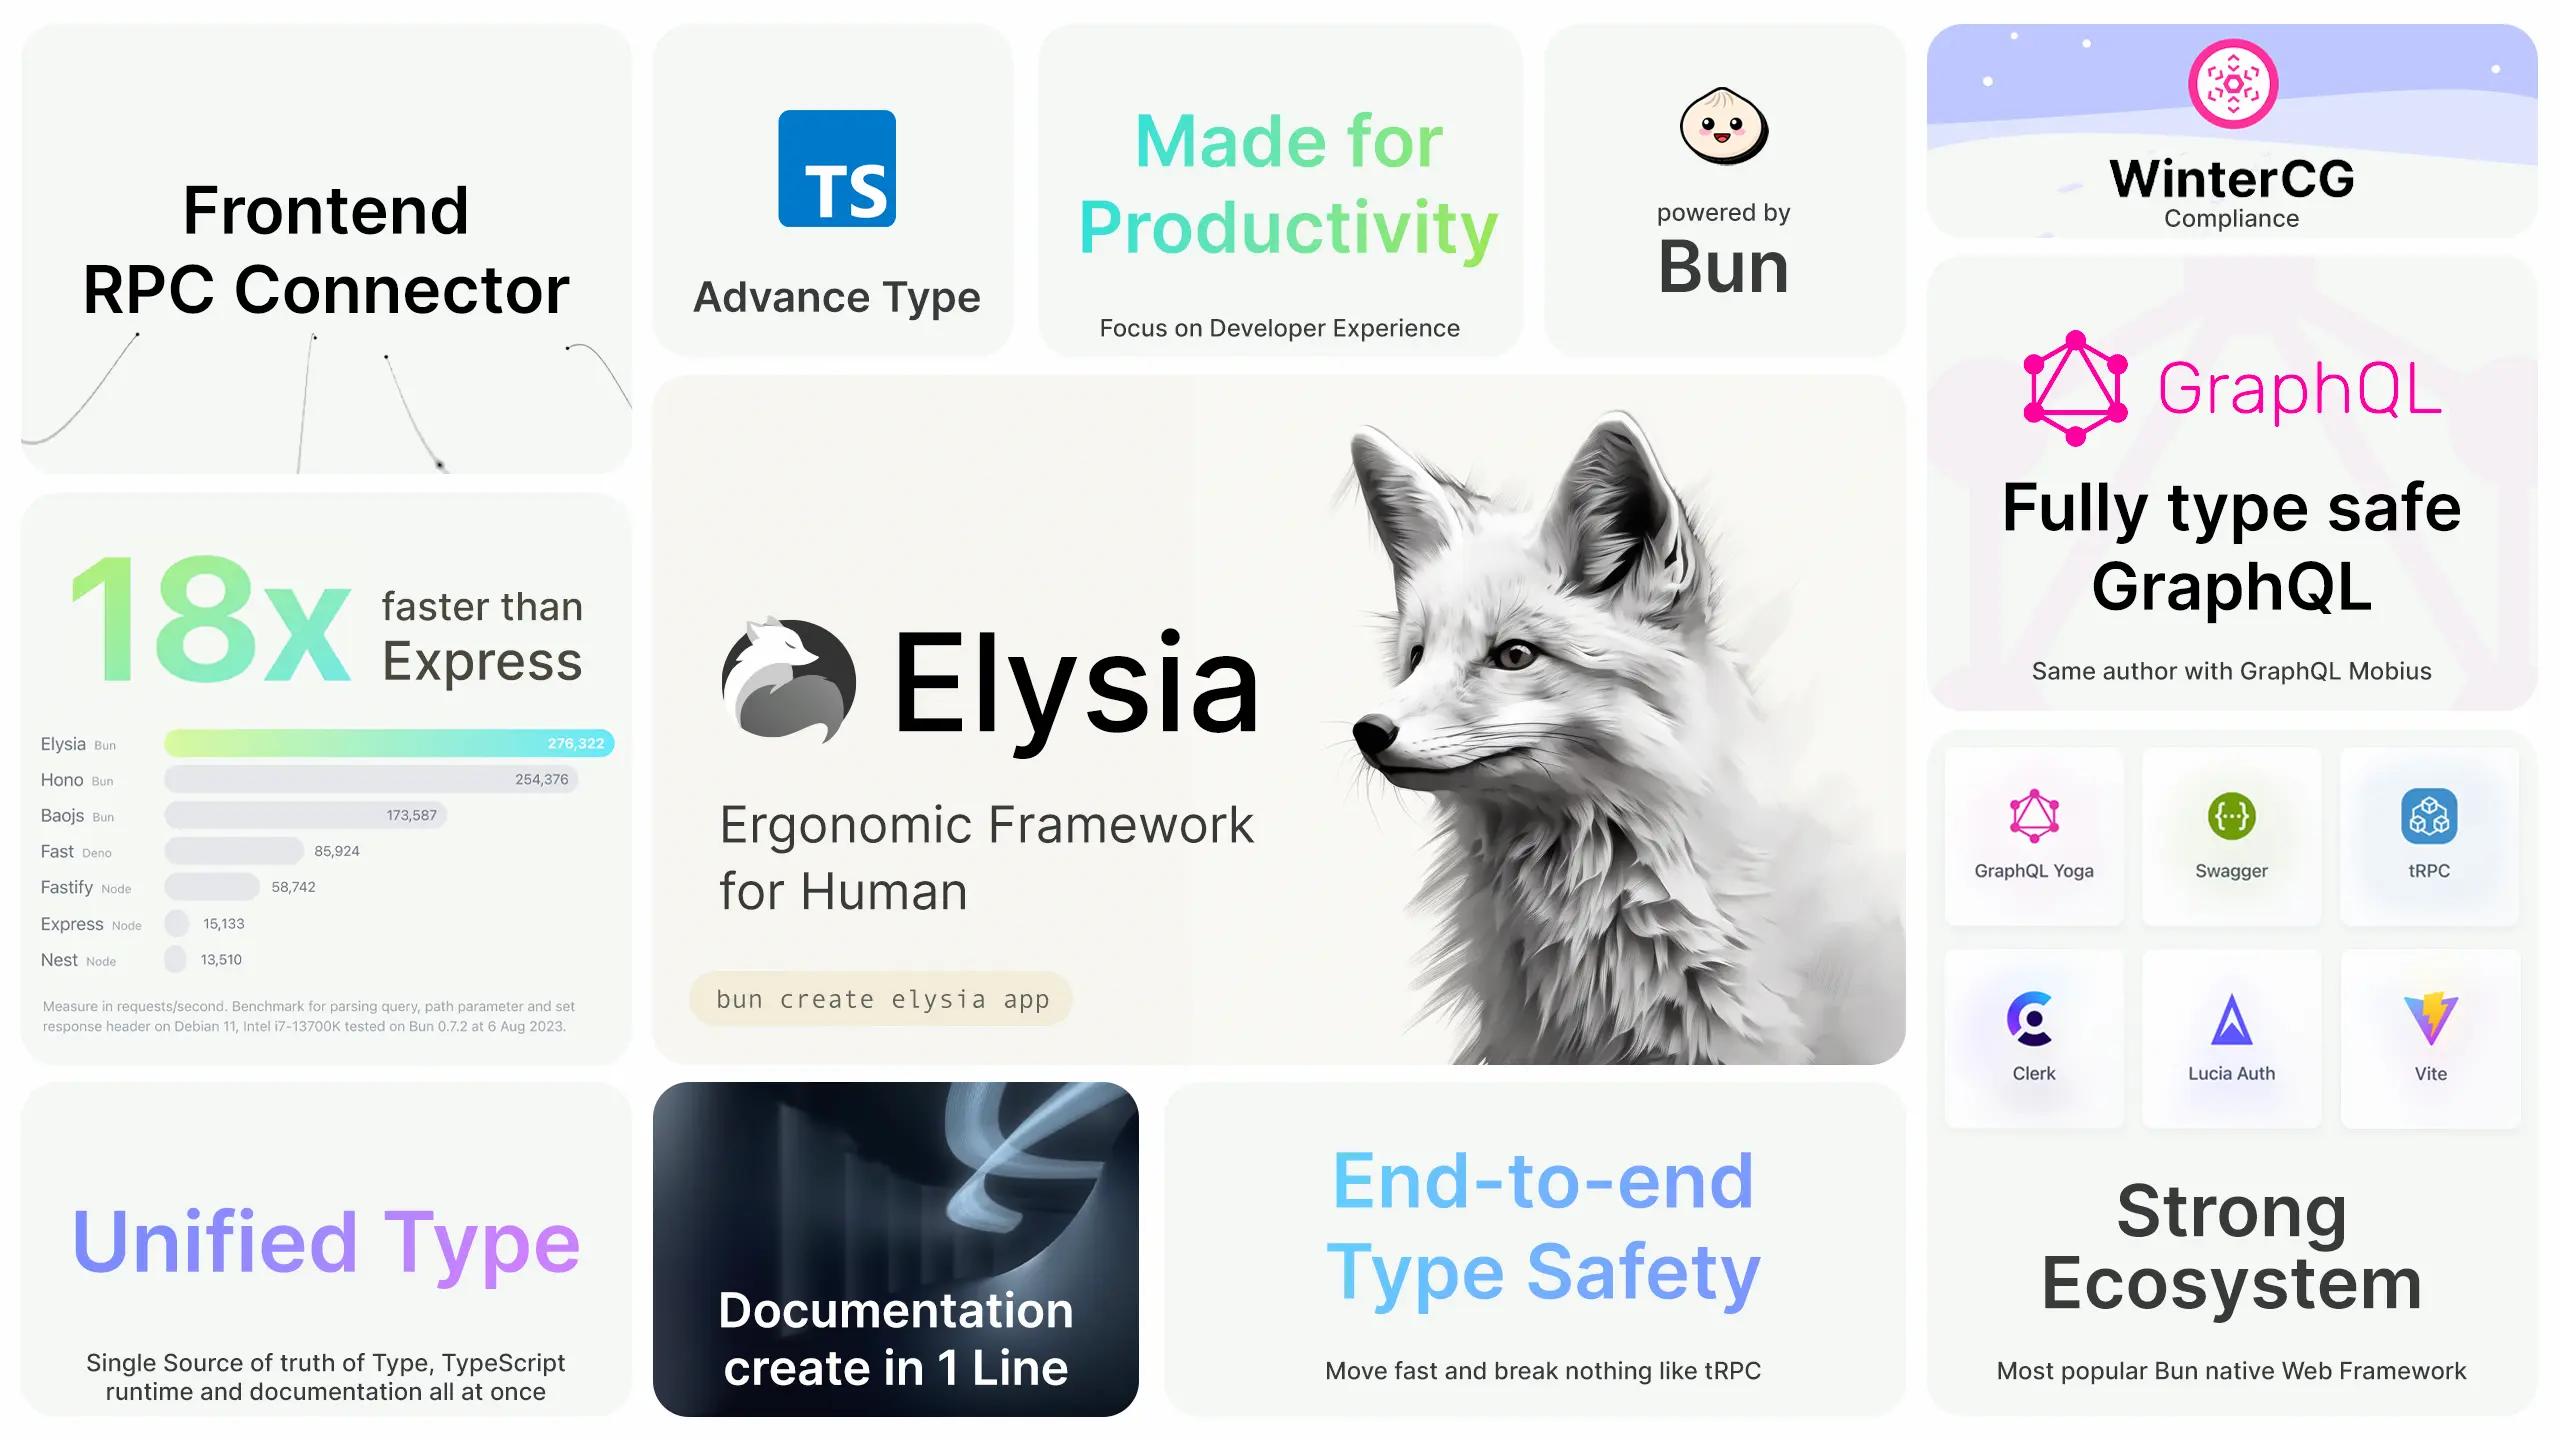 Elysia feature sheet including 18x faster than Express based on Techempower benchmark, Frontend RPC Connector, Advance TypeScript type, unified type single source of truth of type TypeScript runtime and documentation all at once, Made of Productivity focus on developer experience, powered by Bun, WinterCG Compliance, Fully type safe GraphQL (same author with GraphQL Mobius), documentation in one line, End-to-end type safety move fast and break nothing like tRPC, strong ecosystem most popular Bun native Web Framework